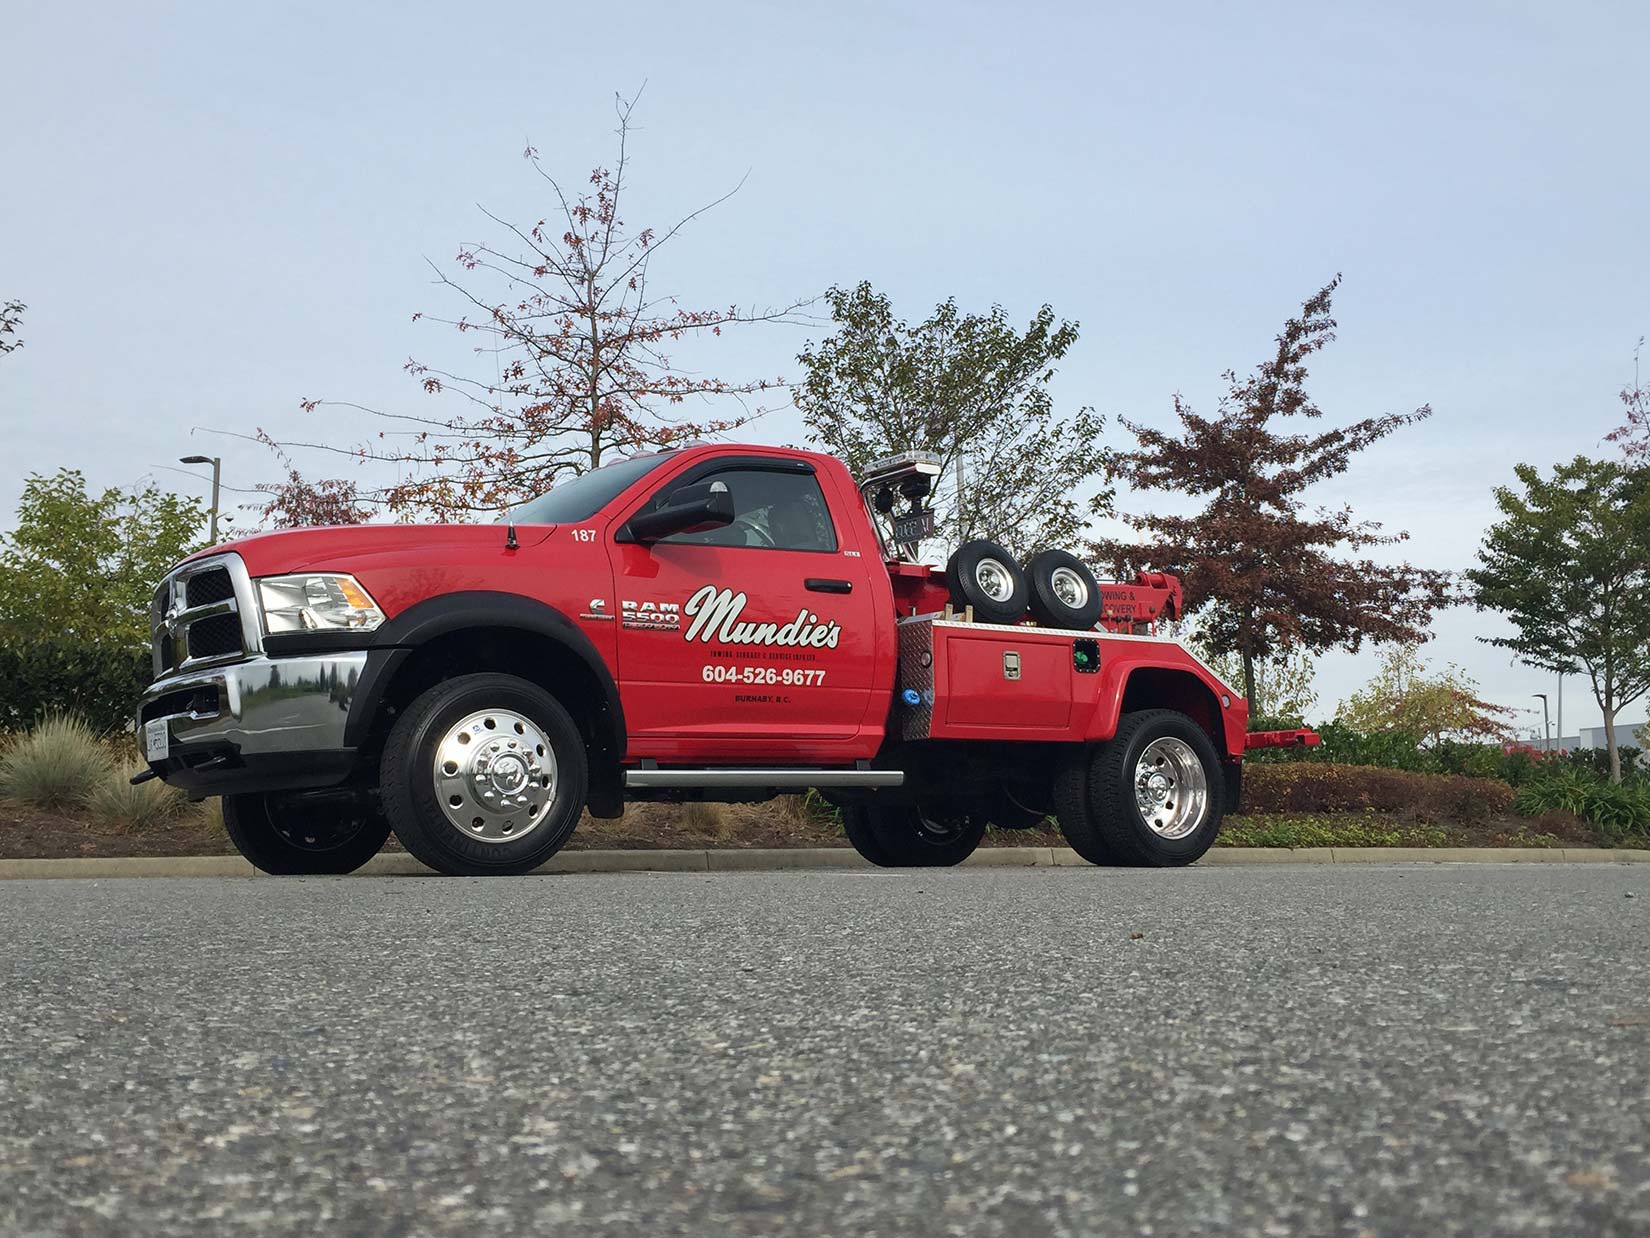 Burnaby towing experts are ready to help you with all kinds of towing services